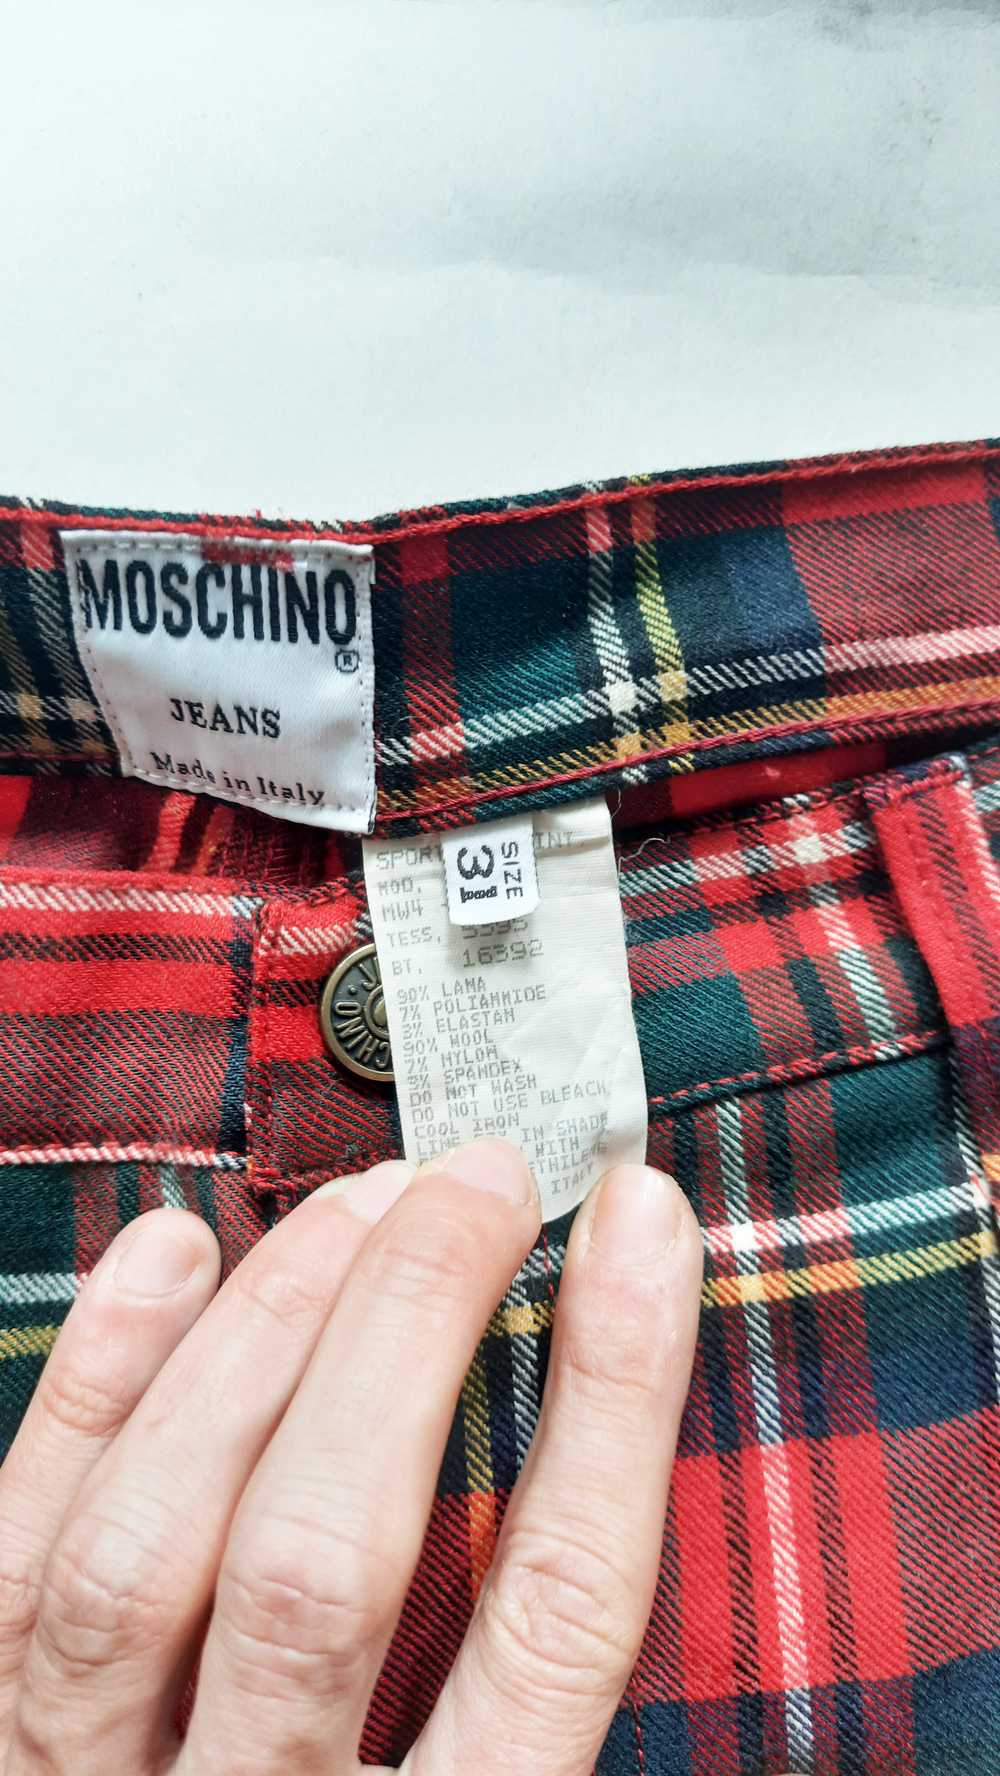 Vintage - Moschino Jeans Tartan Trousers - image 4